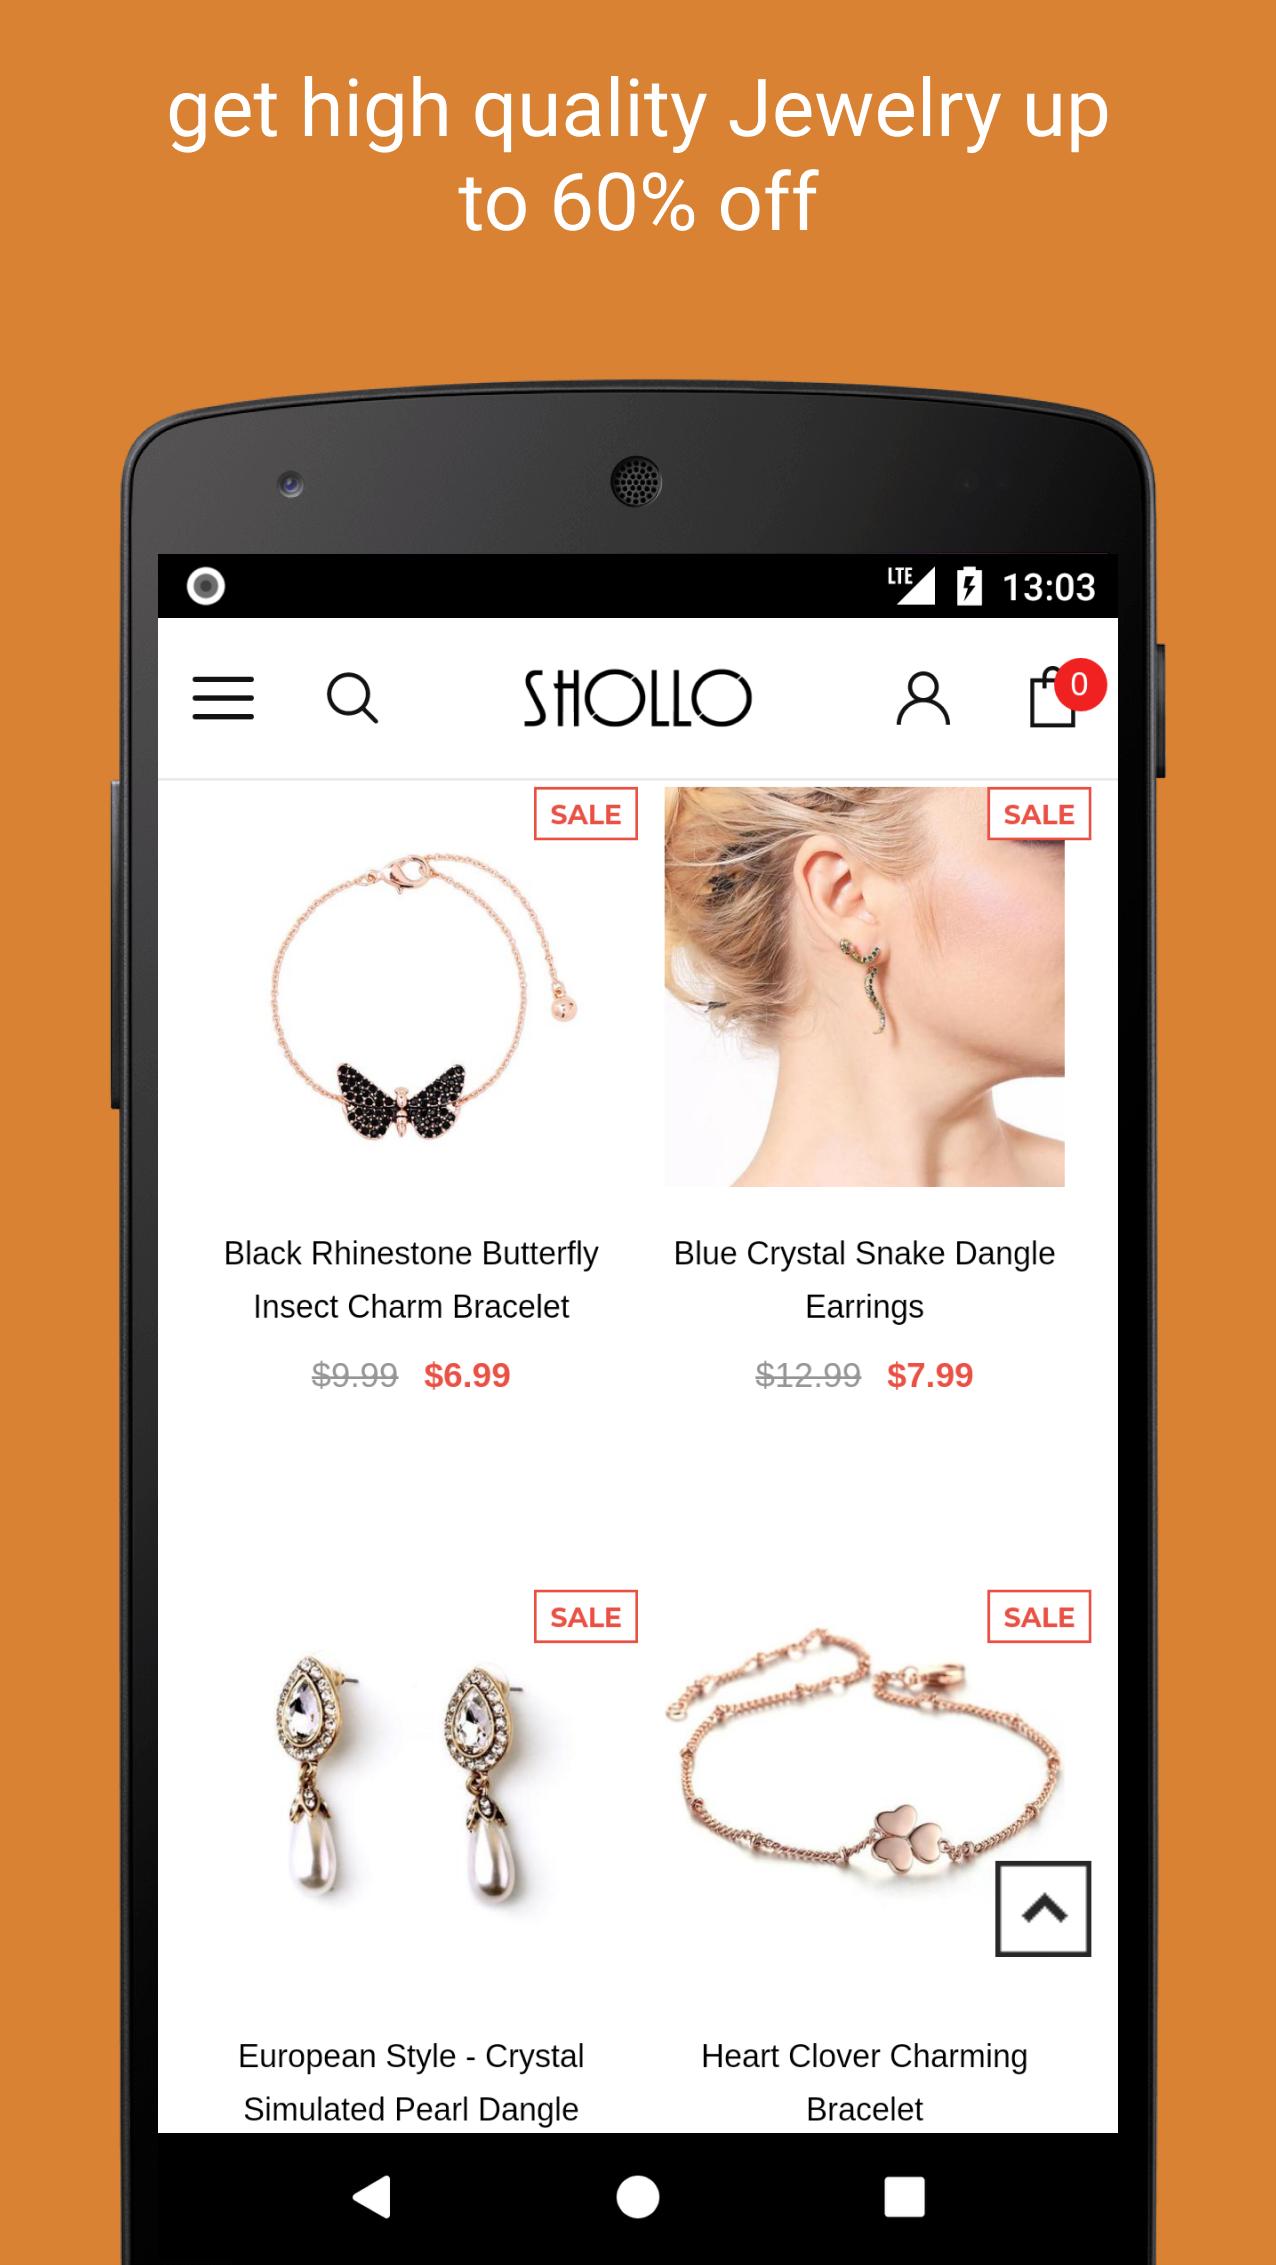 Cheap jewelry and bijouterie online shopping app for Android - APK Download